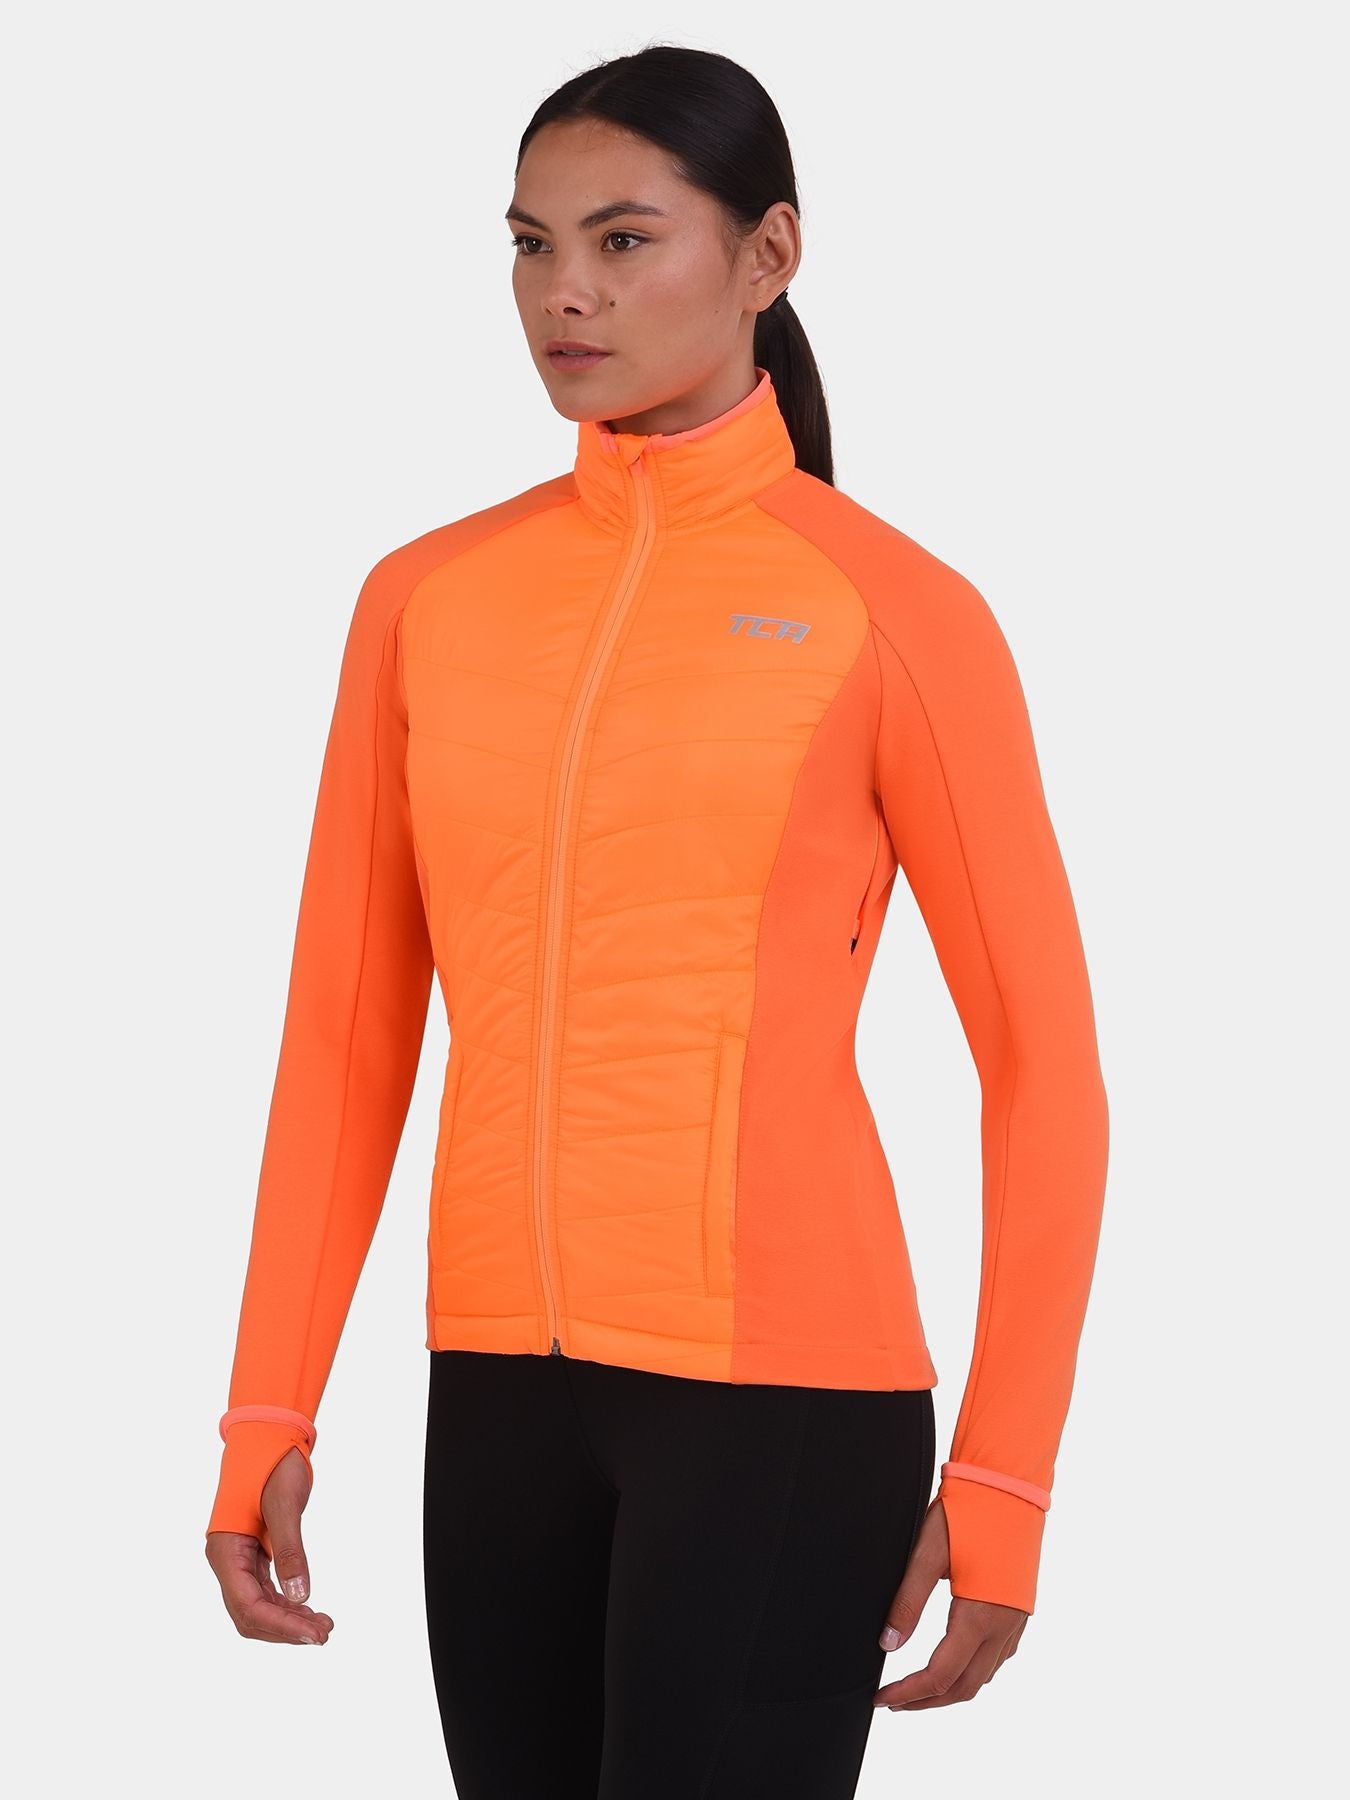 Excel Running Padded Packable Hooded Jacket For Women With Thumbholes, Underarm Ventilation Zips, Zip Pockets & Reflective Strips